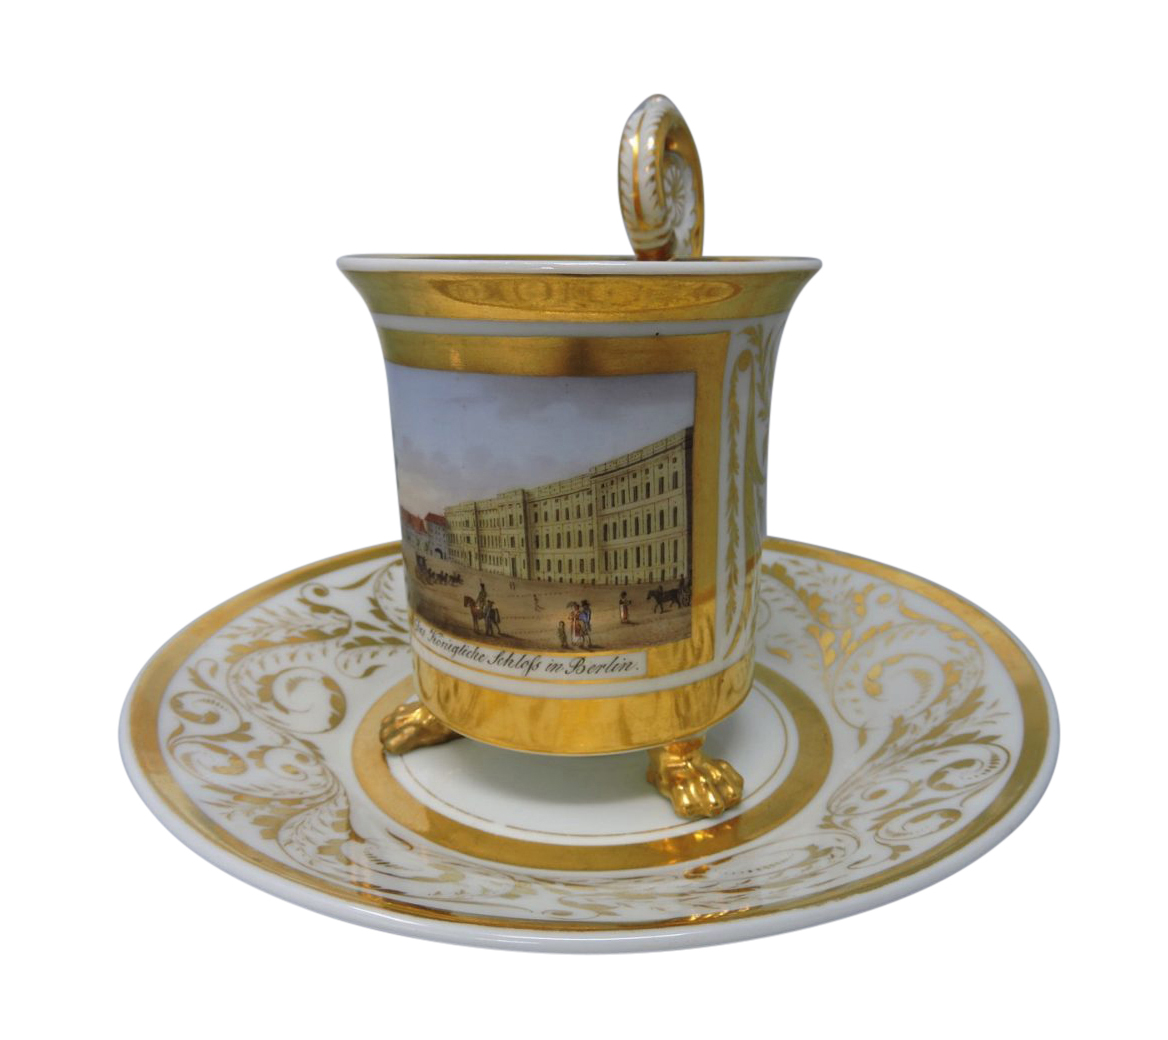 German porcelain cup & saucer - topographical scene of Berlin gold highlights